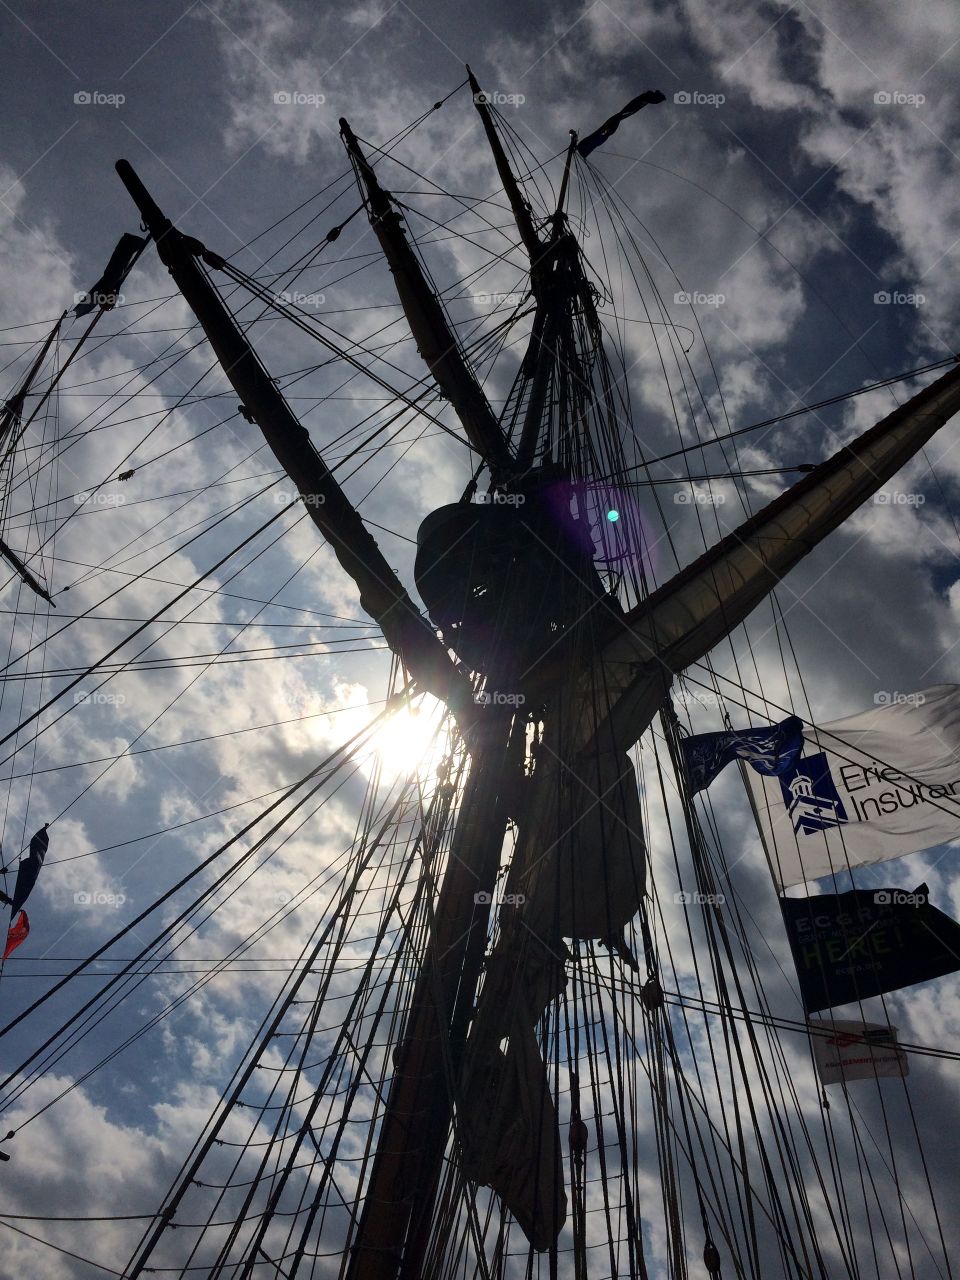 Sky, Rope, Tallest, Ship, Sail